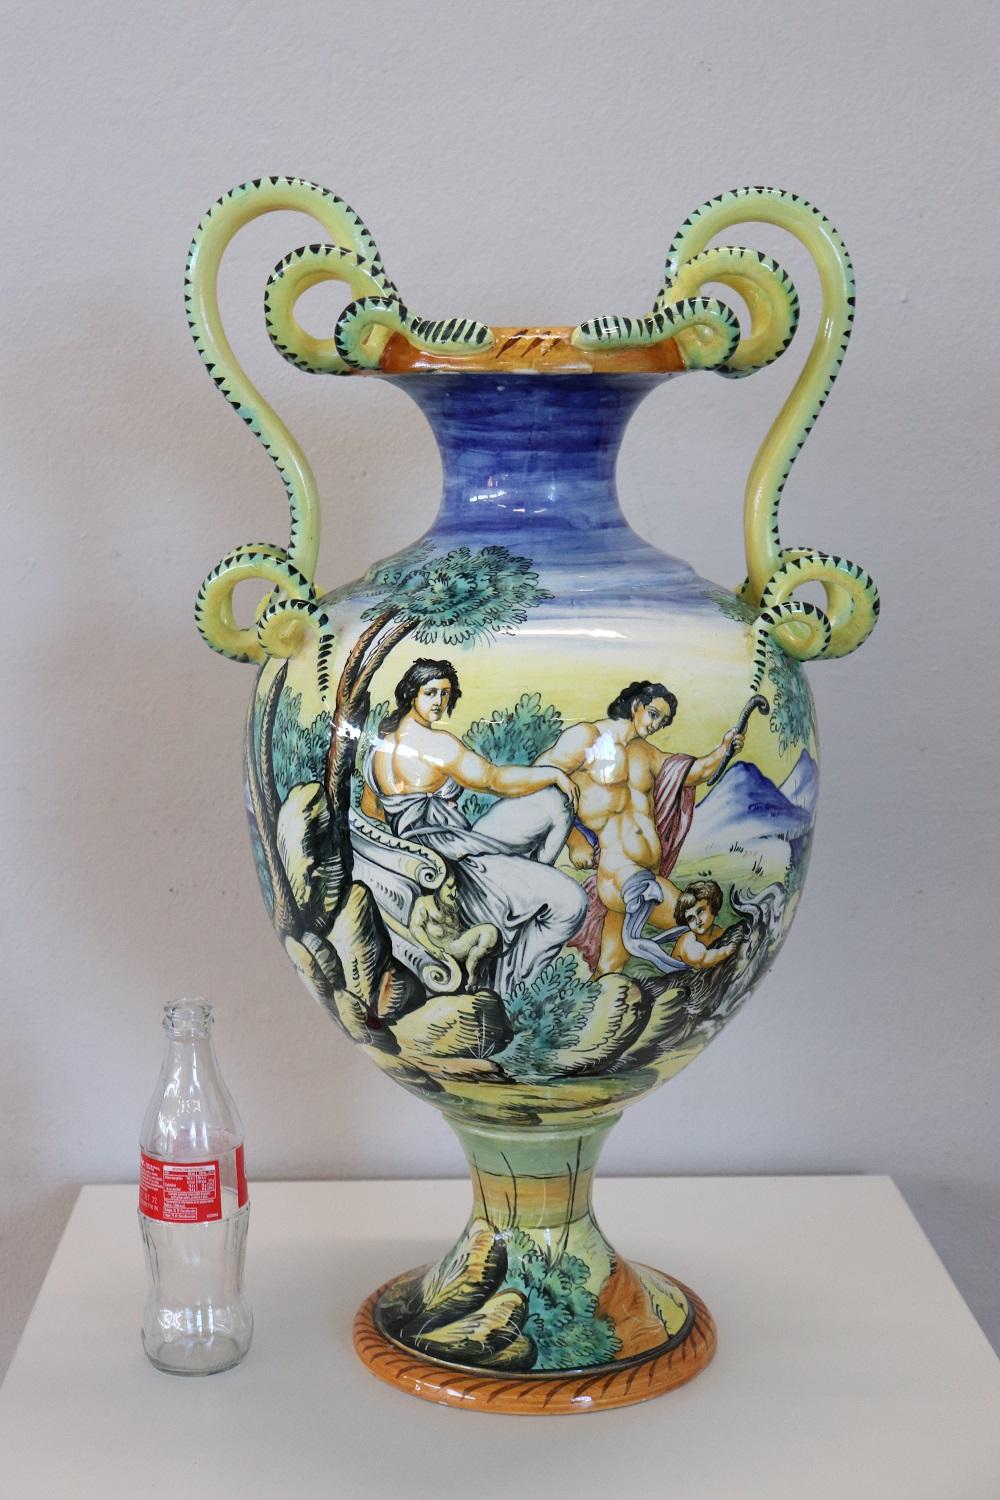 Large Italian-made majolica vase in the shape of an amphora. Refined hand-painted decoration of classic taste with characters and landscapes. Two large snake-shaped handles. Present brand at the base.